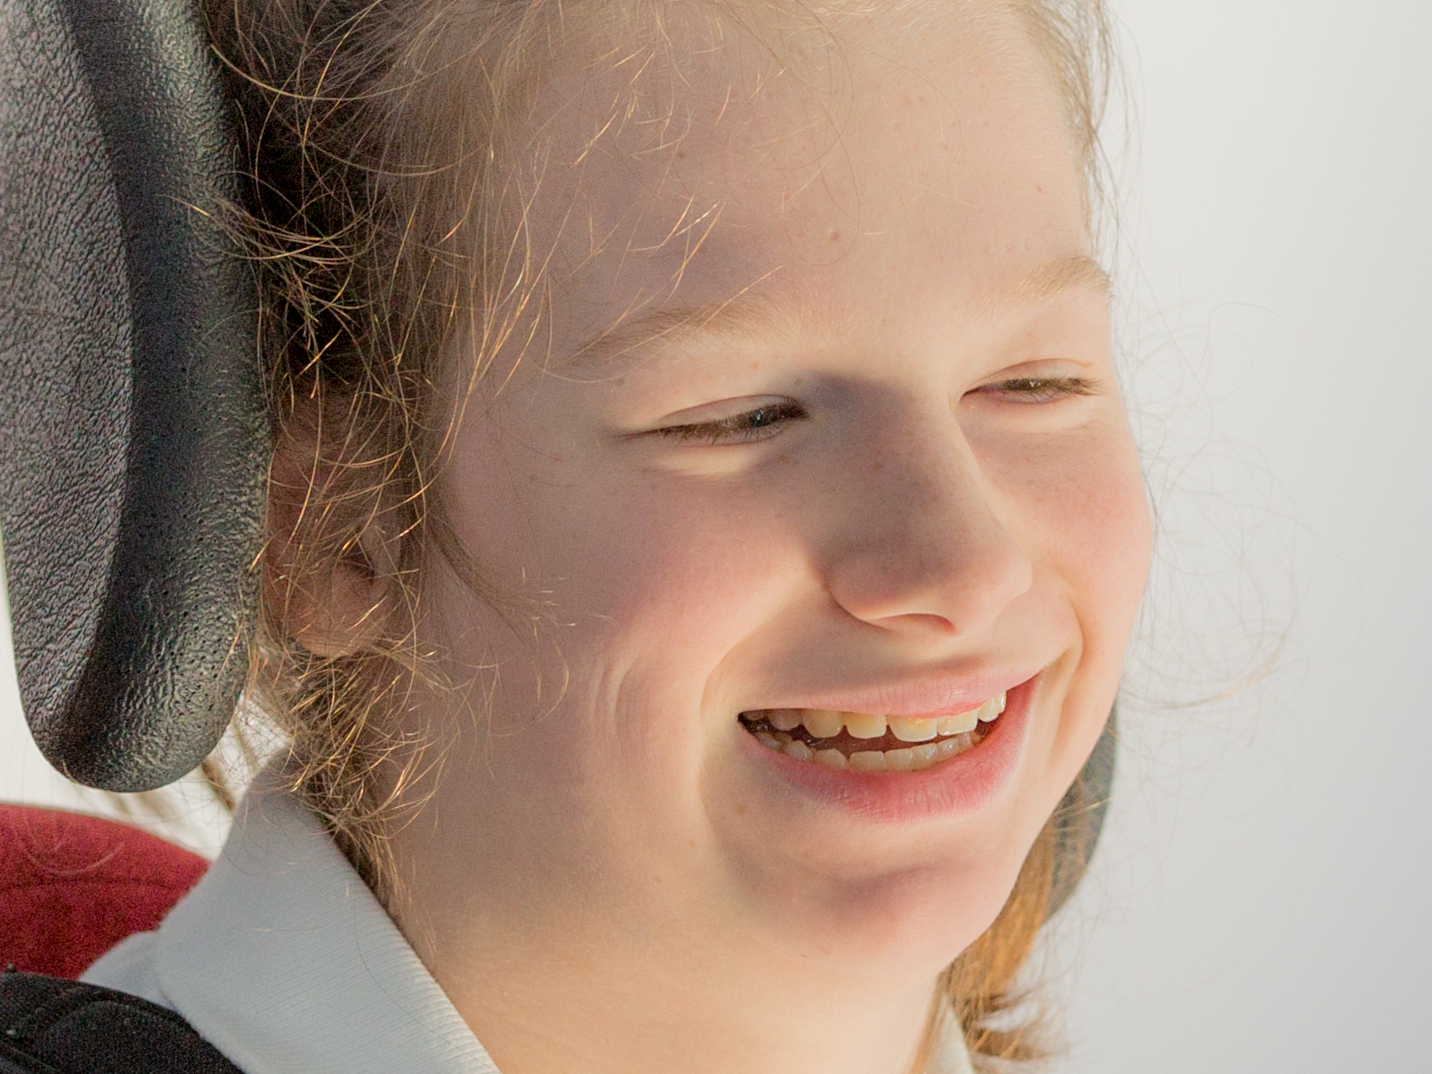 Teenage disabled girl in wheelchair smiling for school portrait